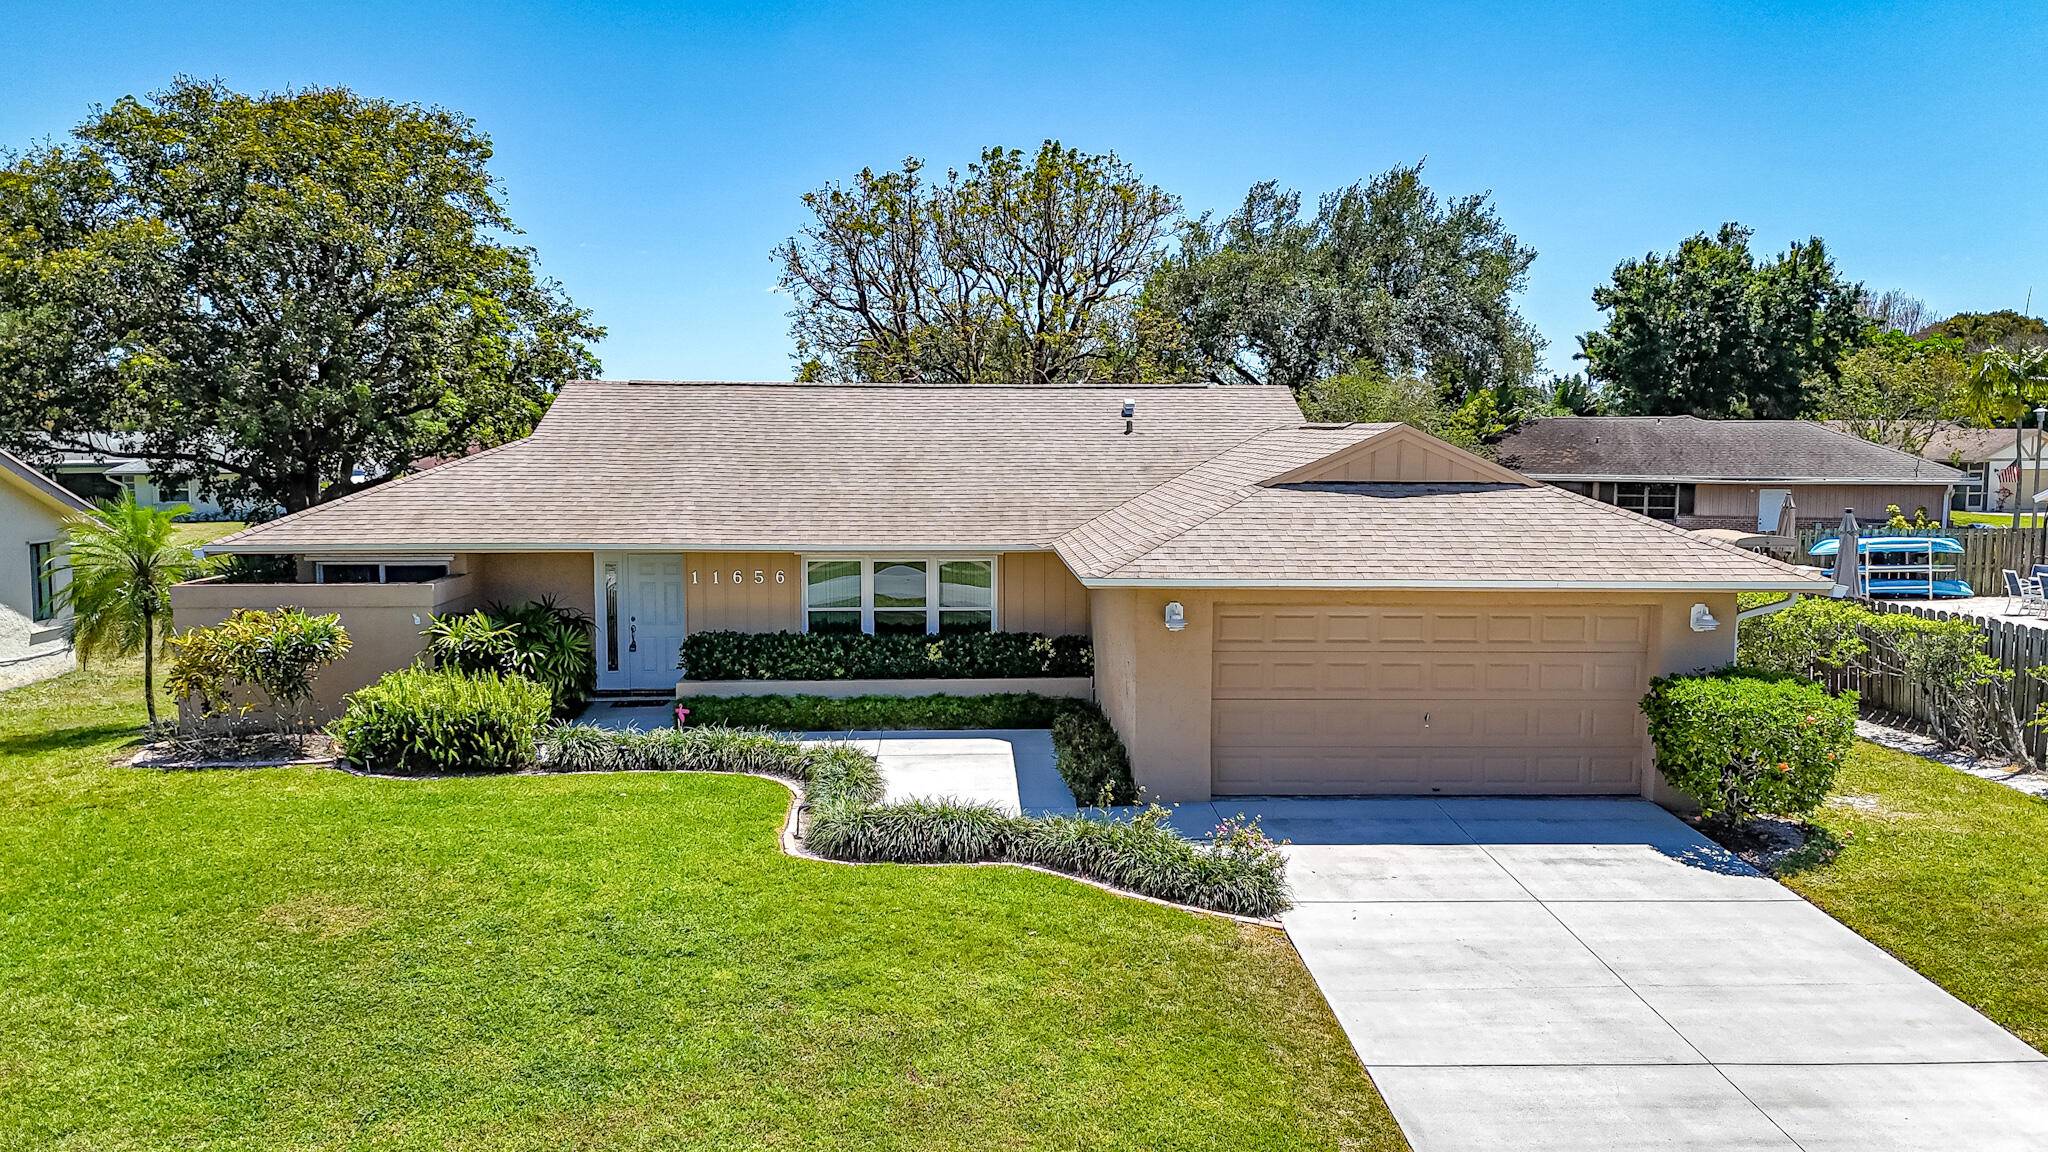 STUNNING ! This 3 bed, 2 bath POOL HOME boasts IMPACT WINDOWS, NO HOA 2020 ROOF, located in an A RATED SCHOOL DISTRICT in the highly desirable neighborhood of Eastwood.